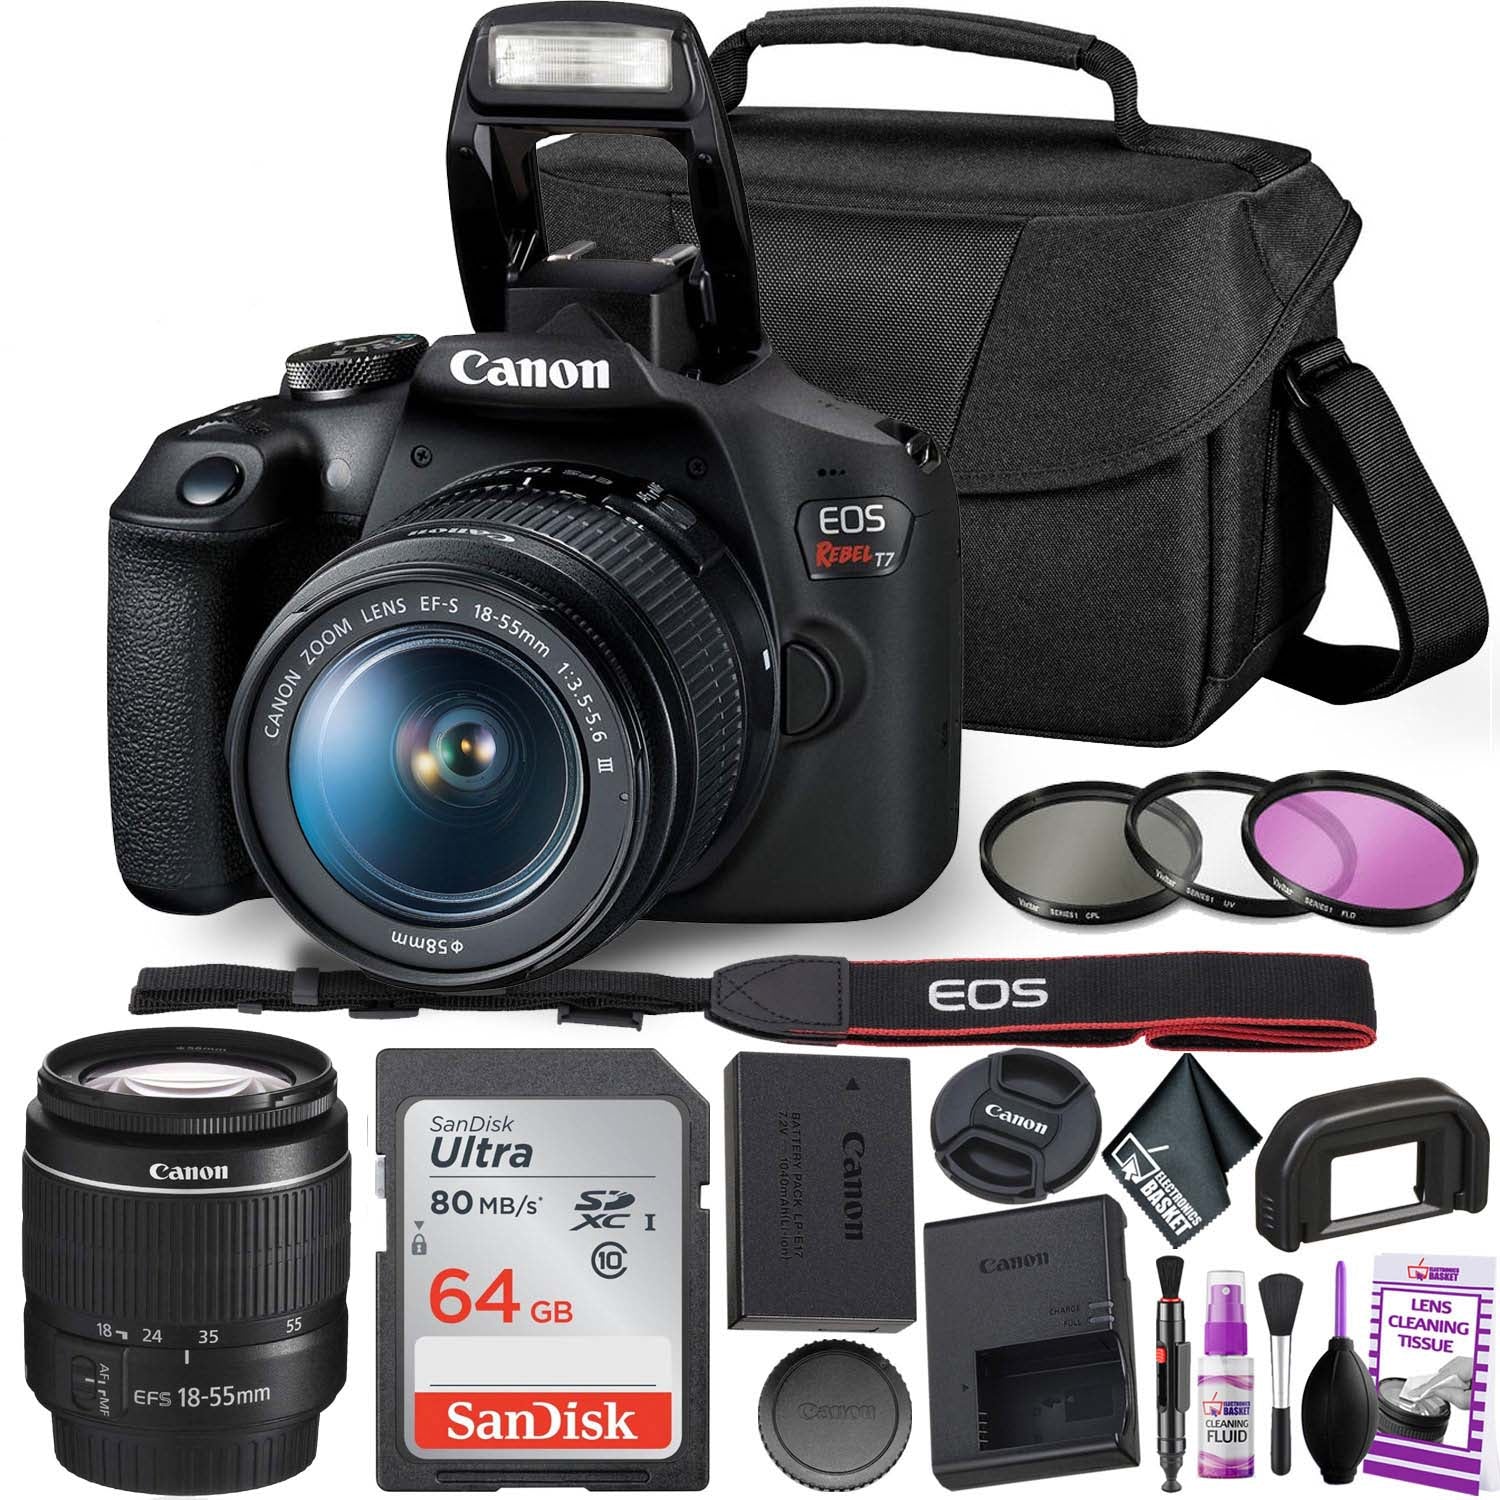 Canon Rebel T7 DSLR Camera with 18-55mm DC III Lens Kit & Sandisk 64GB Ultra Speed Memory Card, Carrying Case | Limited Edition